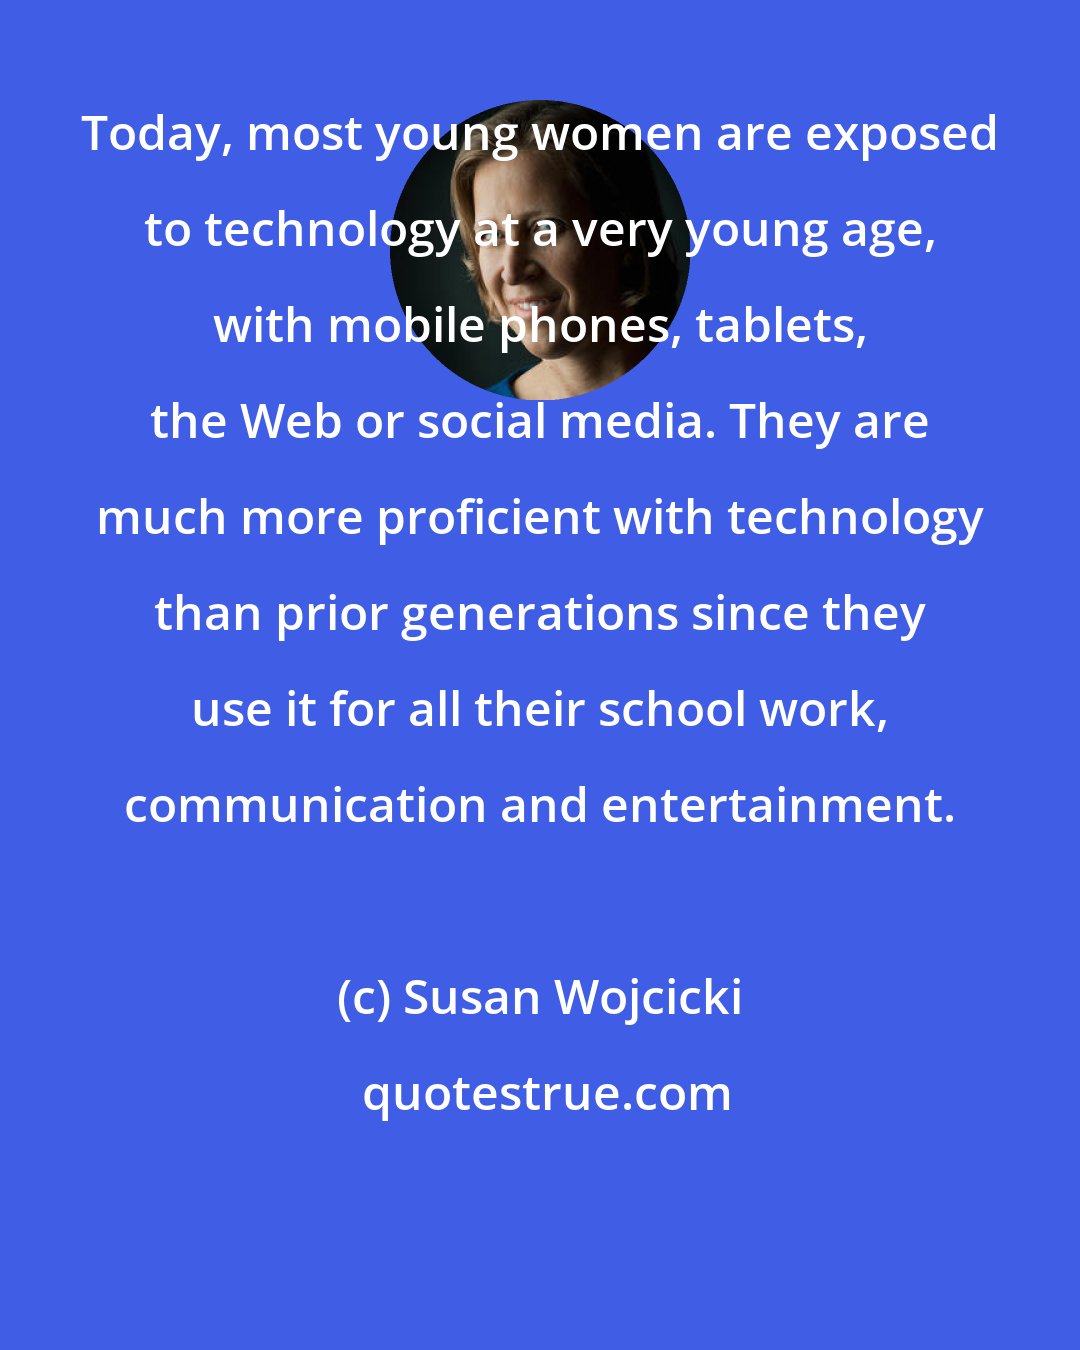 Susan Wojcicki: Today, most young women are exposed to technology at a very young age, with mobile phones, tablets, the Web or social media. They are much more proficient with technology than prior generations since they use it for all their school work, communication and entertainment.